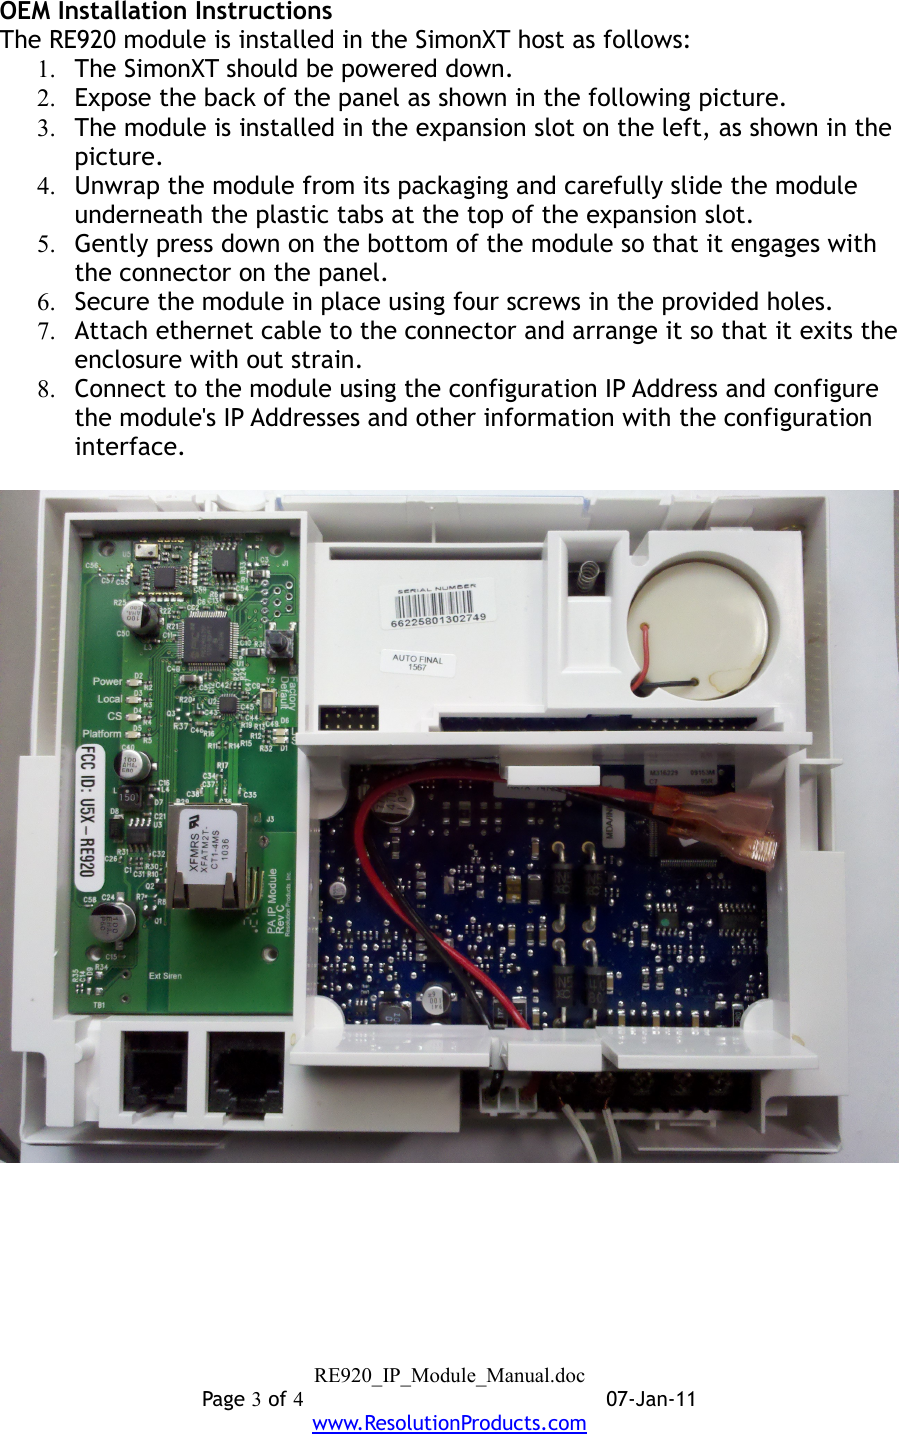 OEM Installation InstructionsThe RE920 module is installed in the SimonXT host as follows:1. The SimonXT should be powered down.2. Expose the back of the panel as shown in the following picture.3. The module is installed in the expansion slot on the left, as shown in the picture.4. Unwrap the module from its packaging and carefully slide the module underneath the plastic tabs at the top of the expansion slot.5. Gently press down on the bottom of the module so that it engages with the connector on the panel.6. Secure the module in place using four screws in the provided holes.7. Attach ethernet cable to the connector and arrange it so that it exits the enclosure with out strain.8. Connect to the module using the configuration IP Address and configure the module&apos;s IP Addresses and other information with the configuration interface.RE920_IP_Module_Manual.docPage 3 of 407-Jan-11www.ResolutionProducts.com